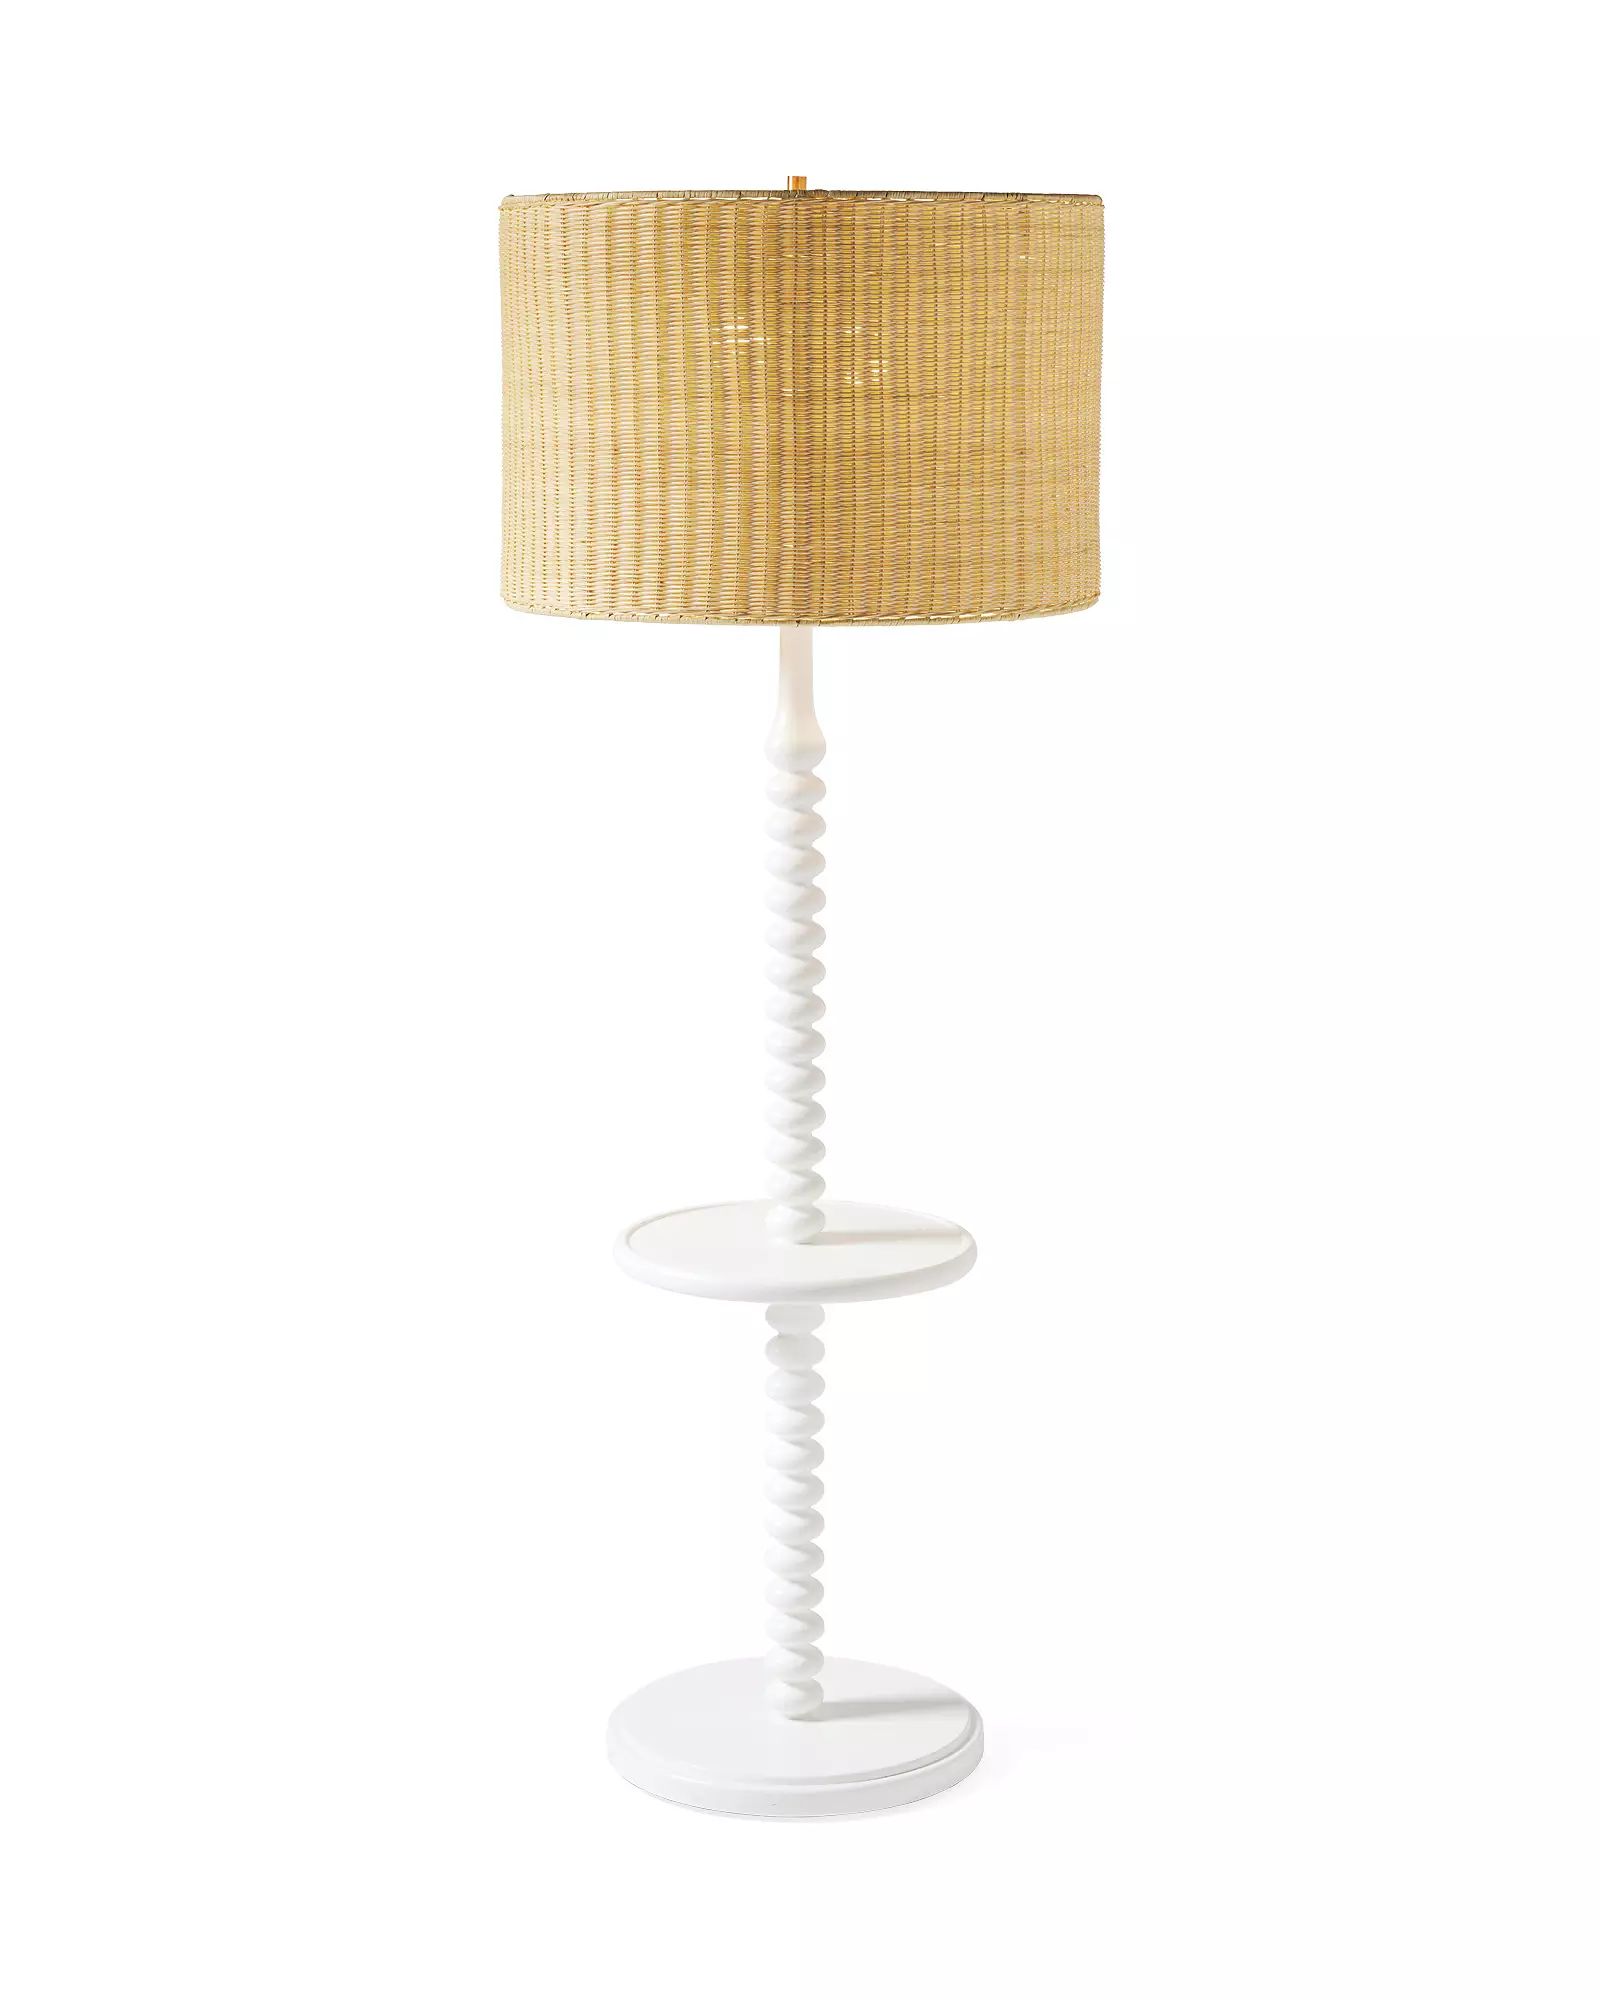 Springview Floor Lamp | Serena and Lily